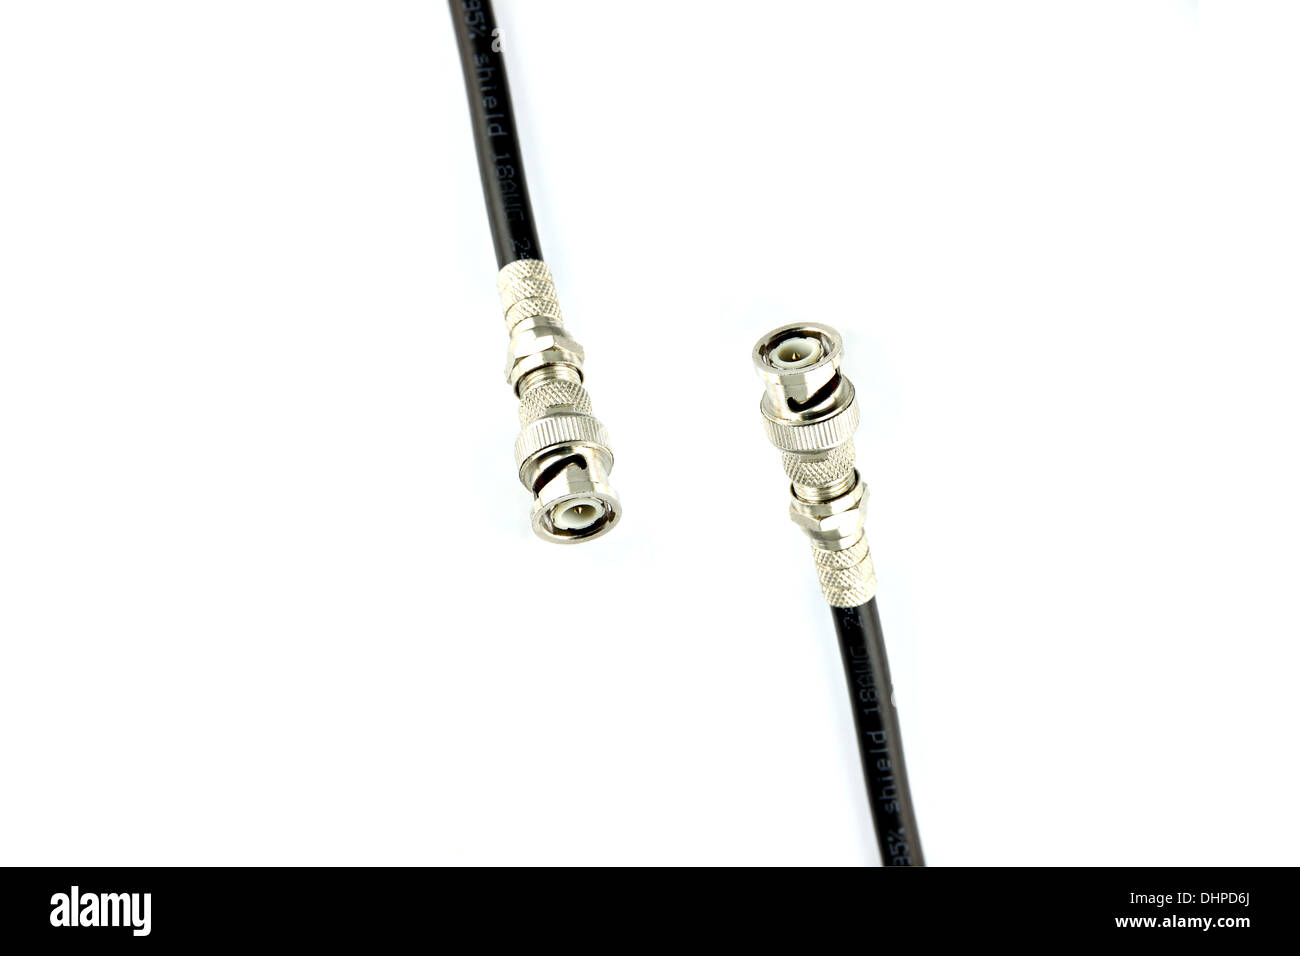 Cable used to connect the CCTV Camera Computer on white background. Stock Photo